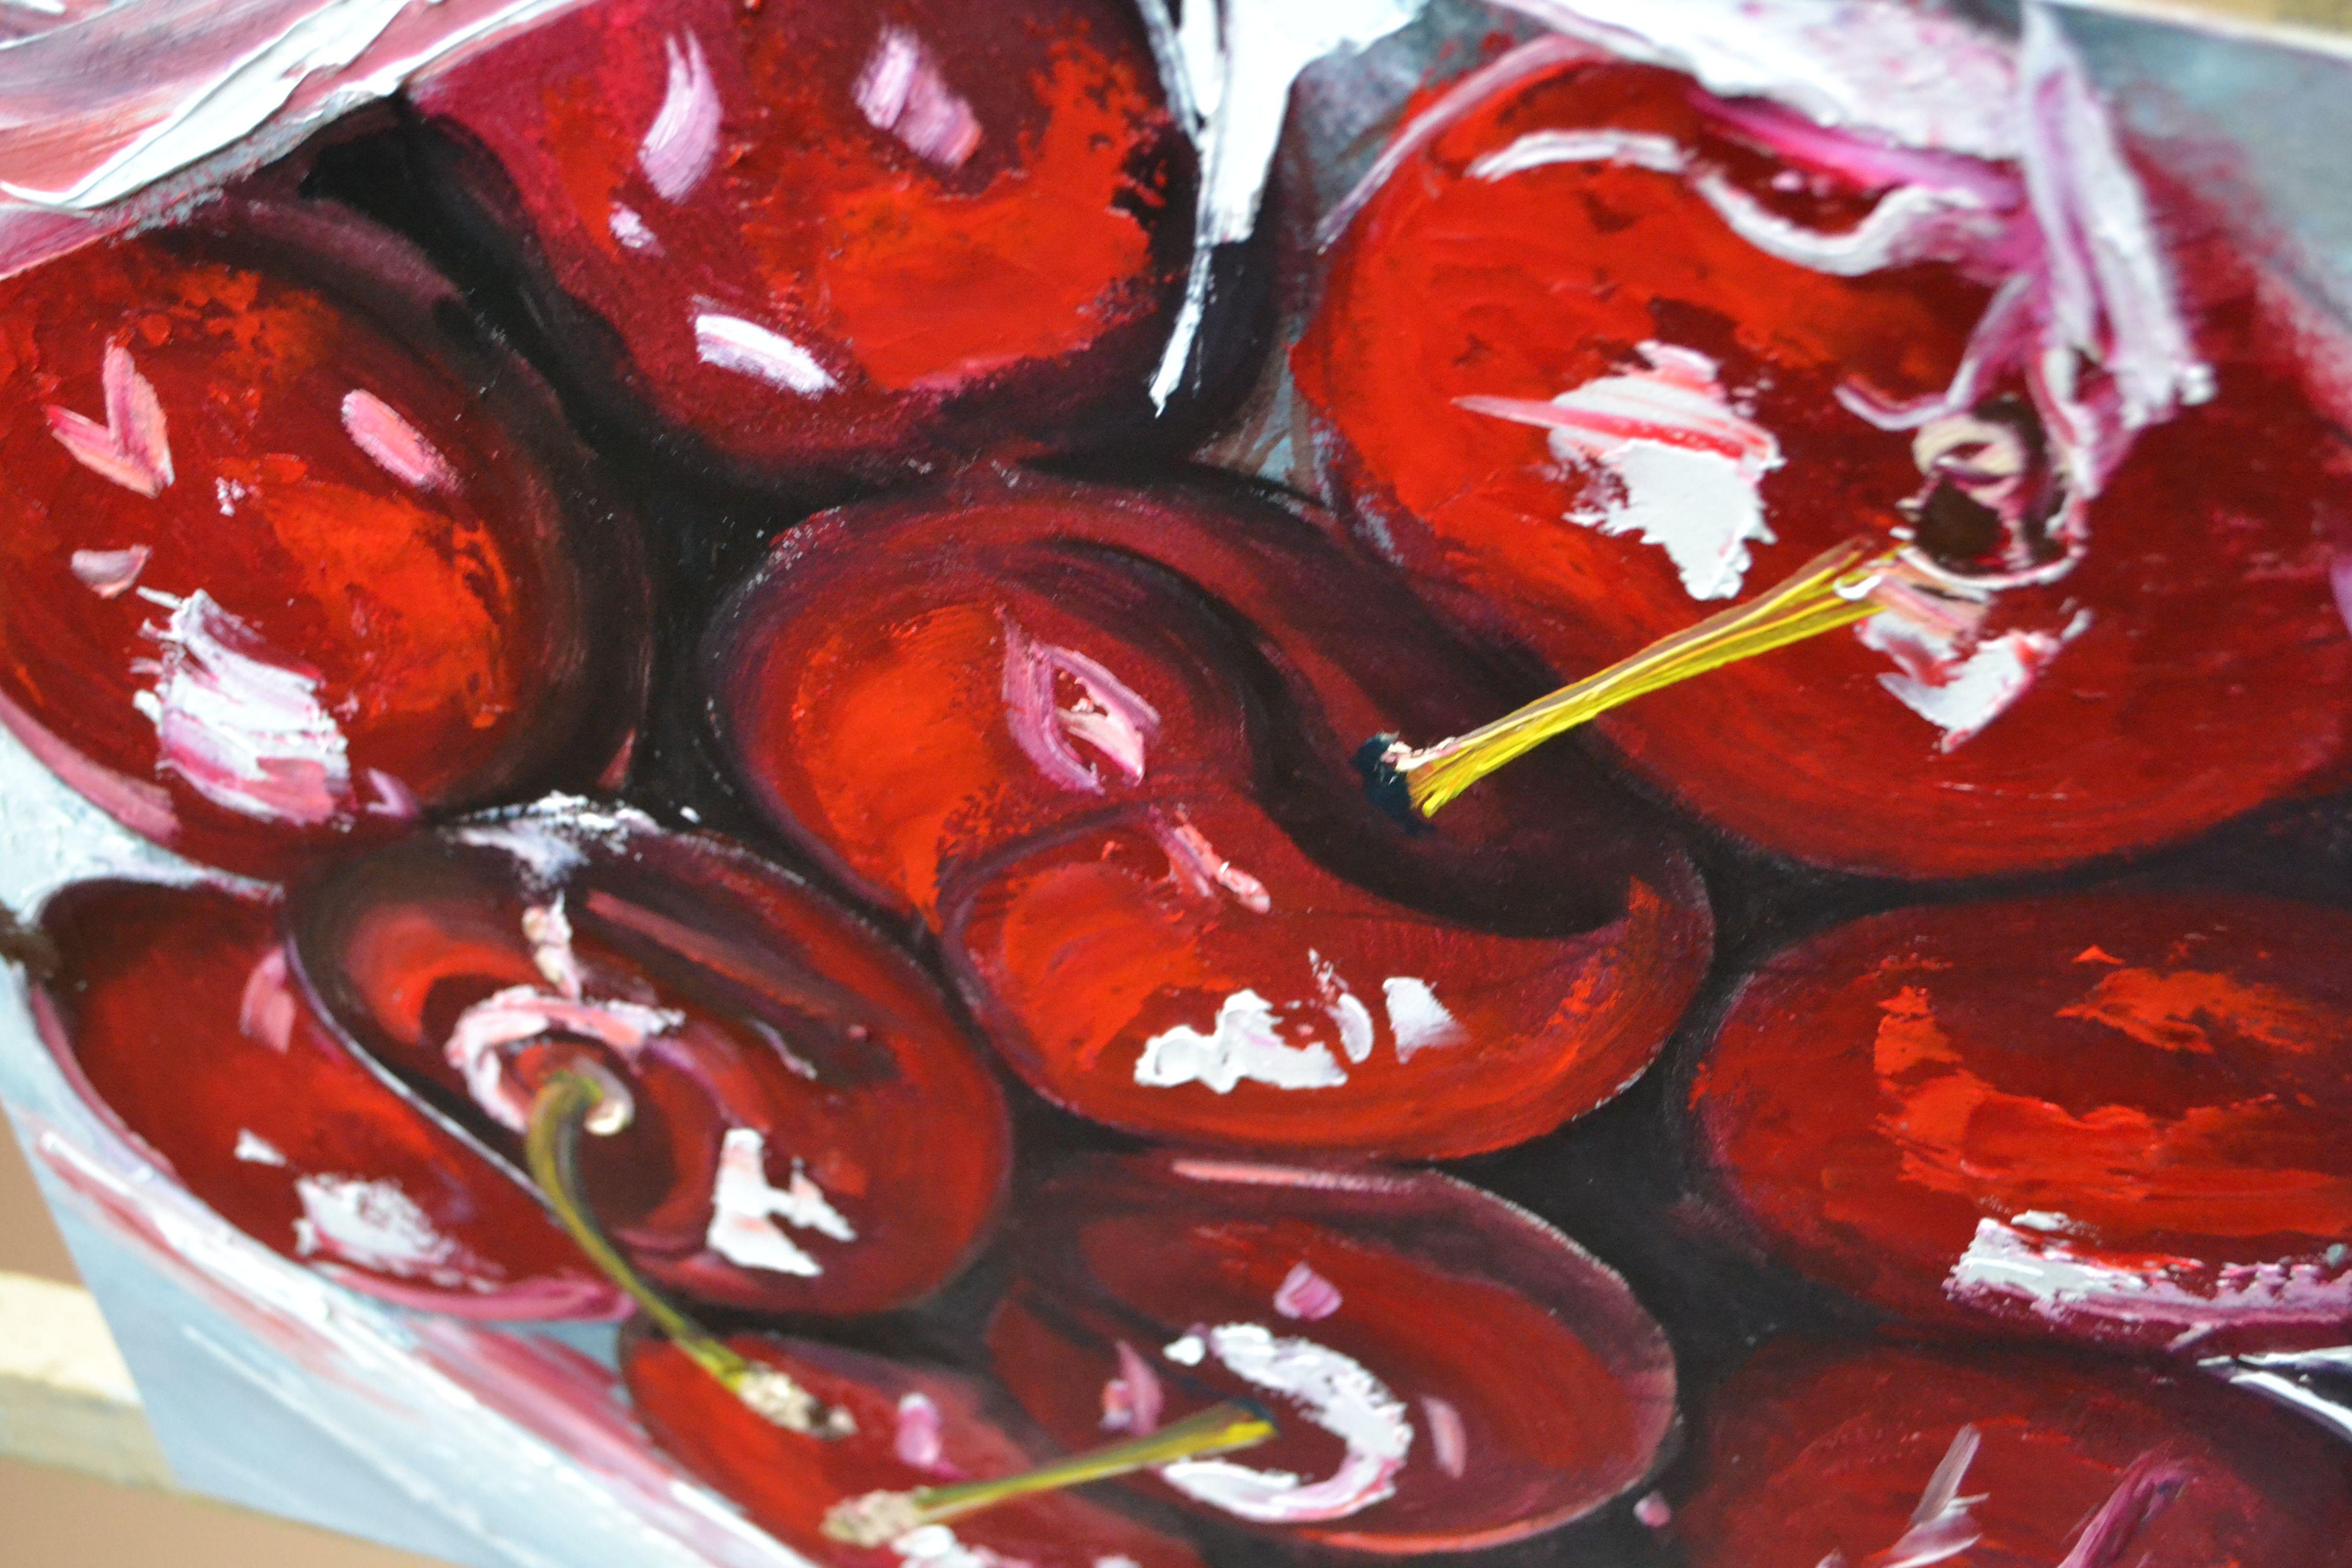 Bright red cherries oil painting. Food, taste, berries.    Oil on a gallery hardboard.    Certificate of Authenticity included.    I use all professional packing materials to make sure your artwork gets to you safely wherever in the world you may